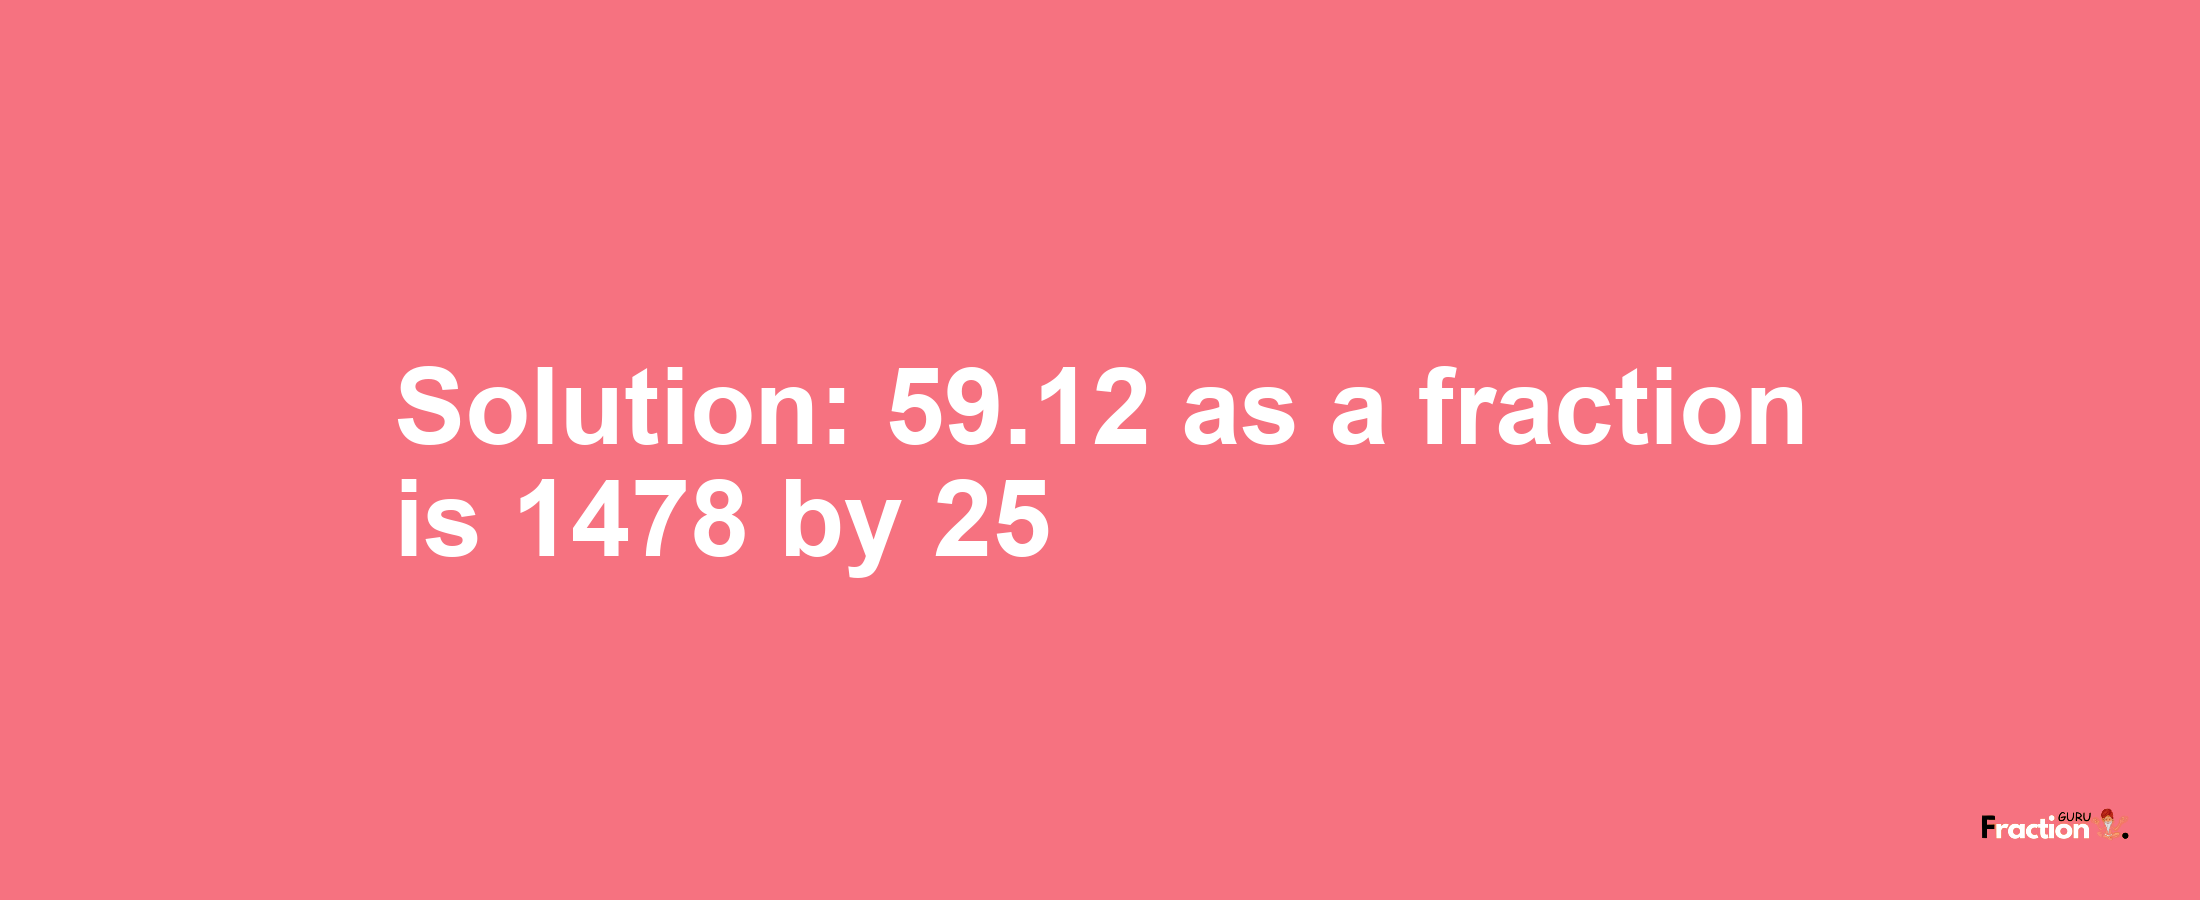 Solution:59.12 as a fraction is 1478/25